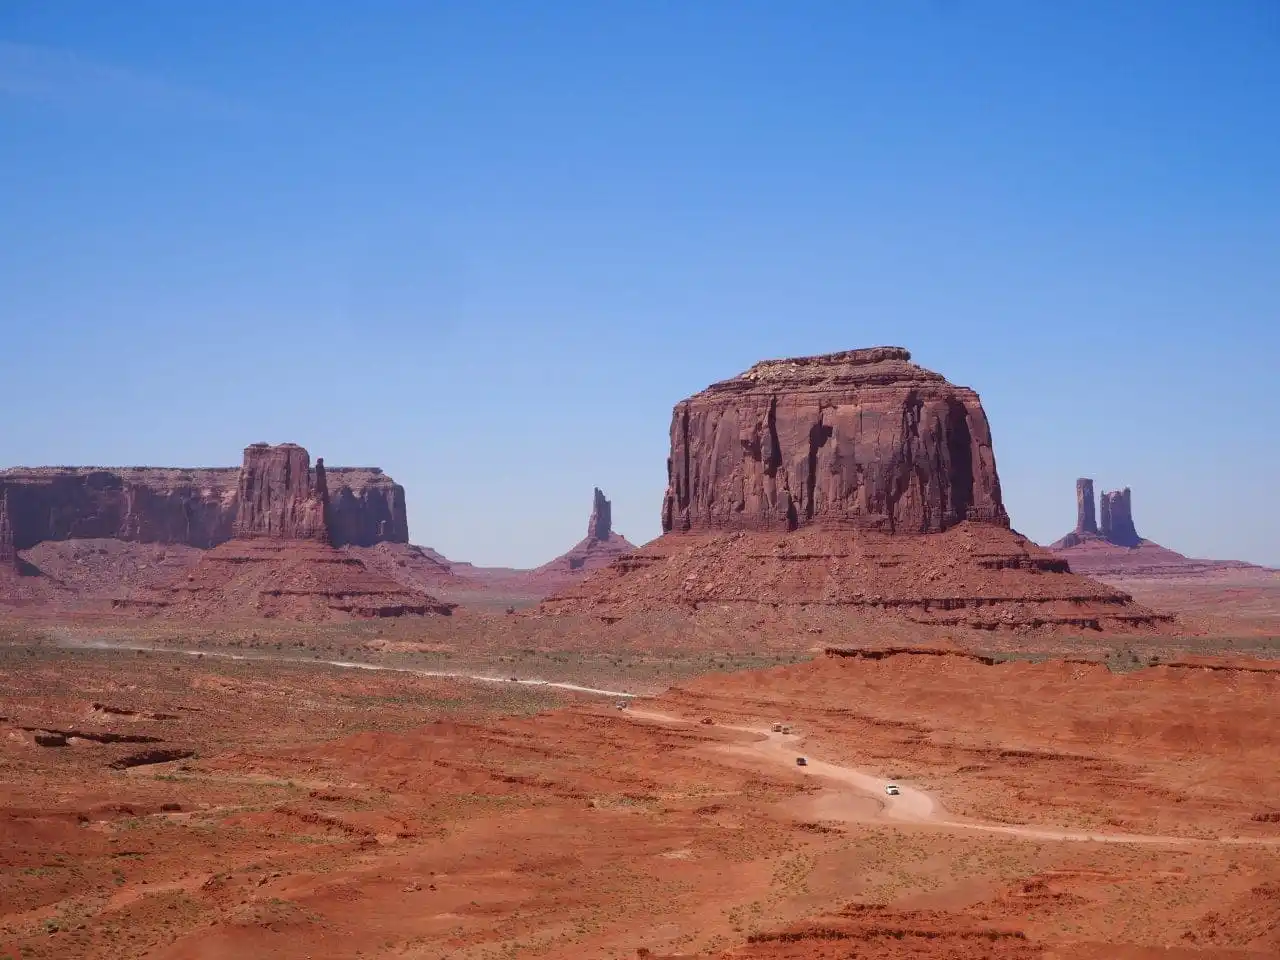 The monuments at Monument Valley are truly massive